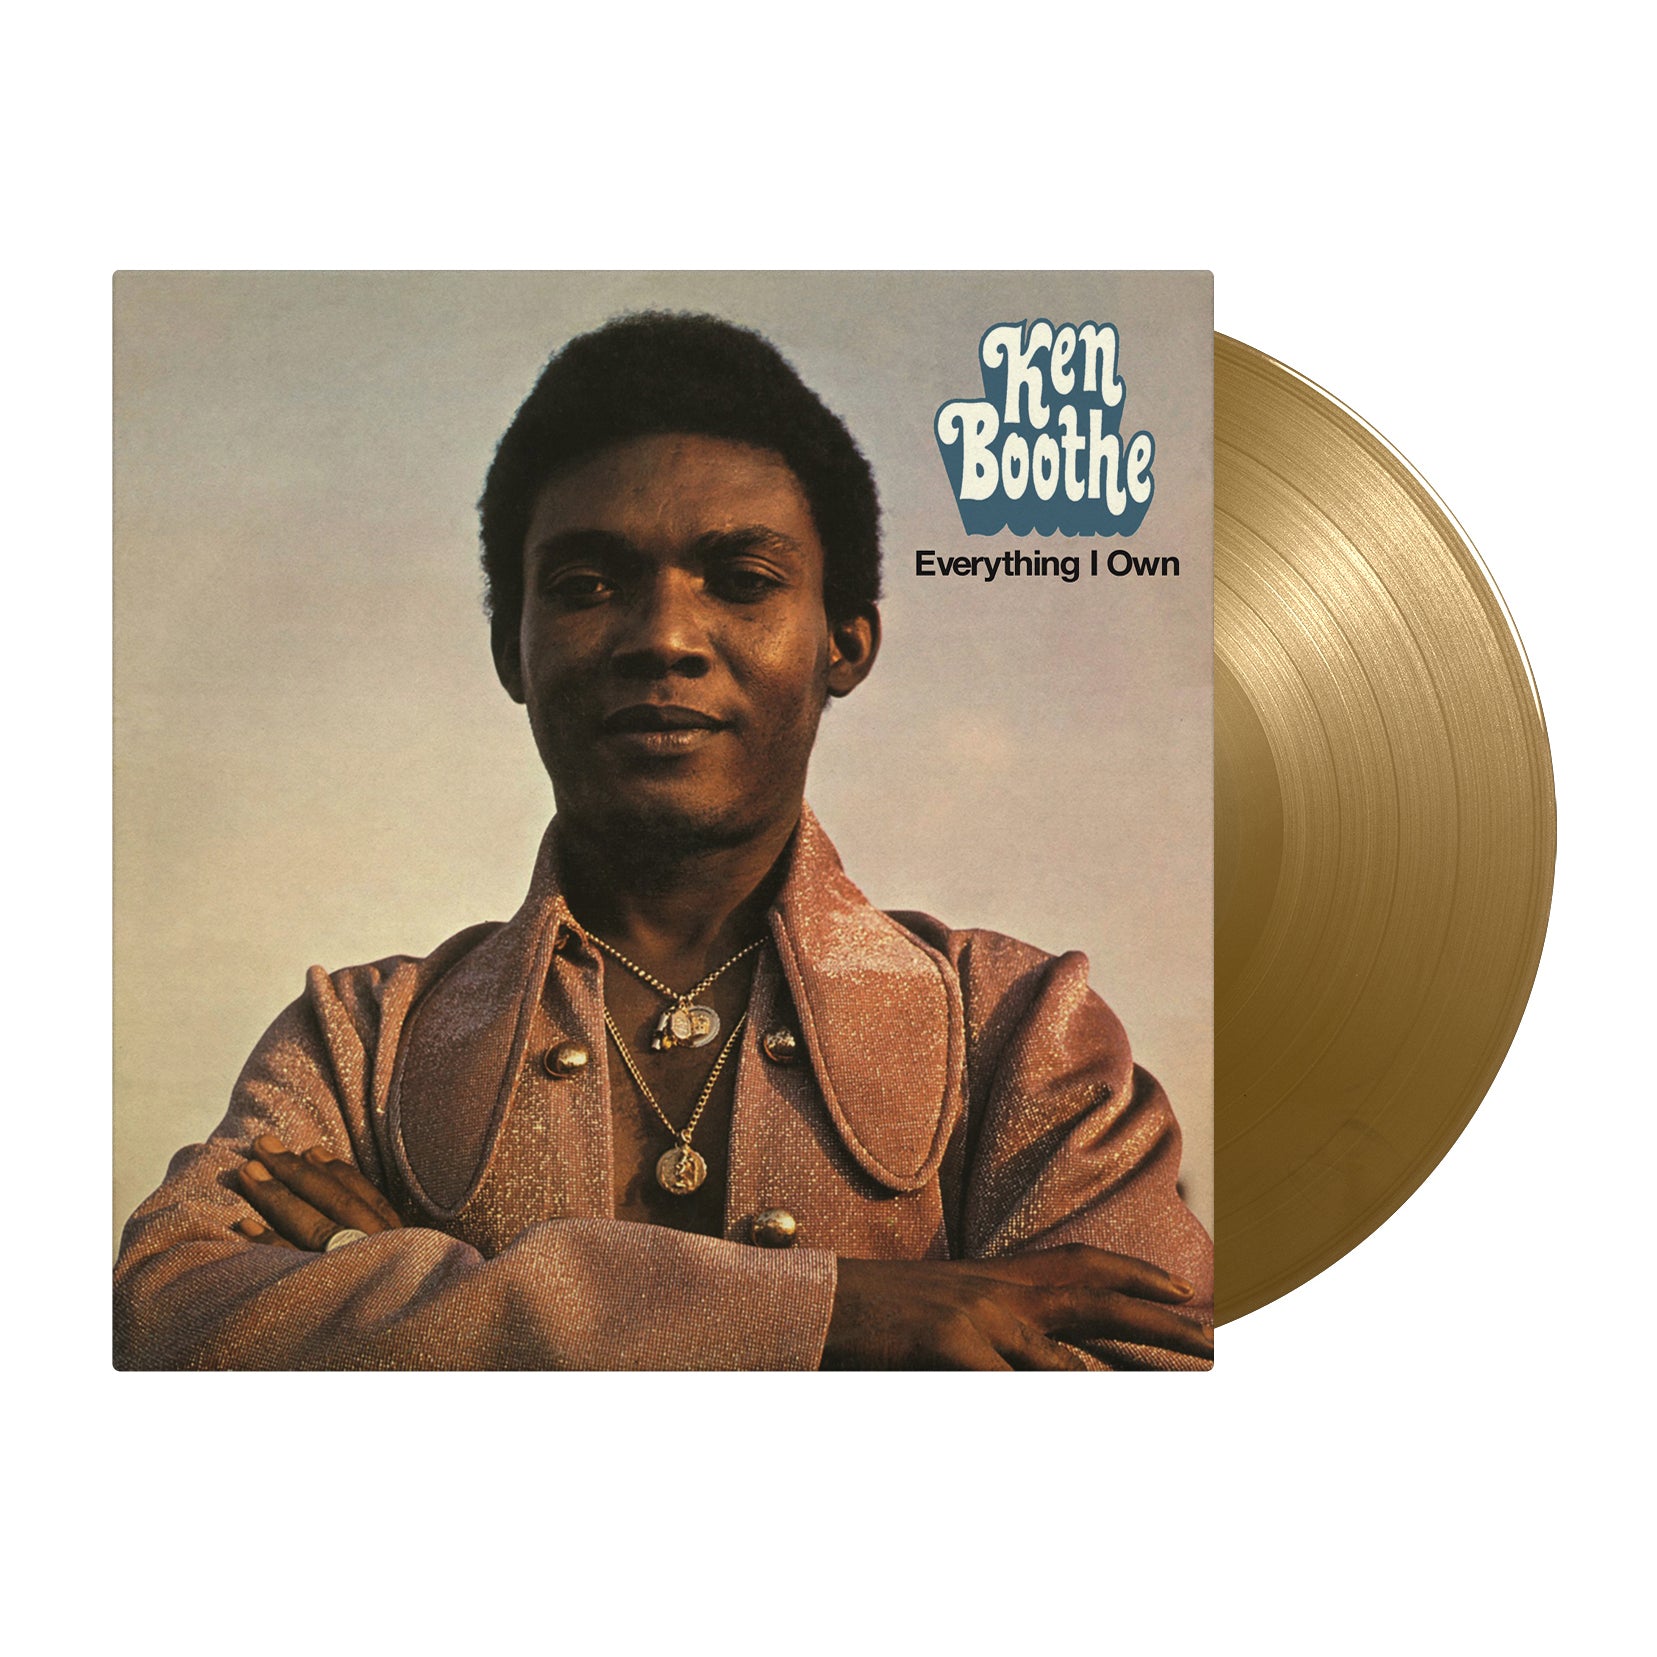 Ken Boothe - Everything I Own: Limited Gold Vinyl LP